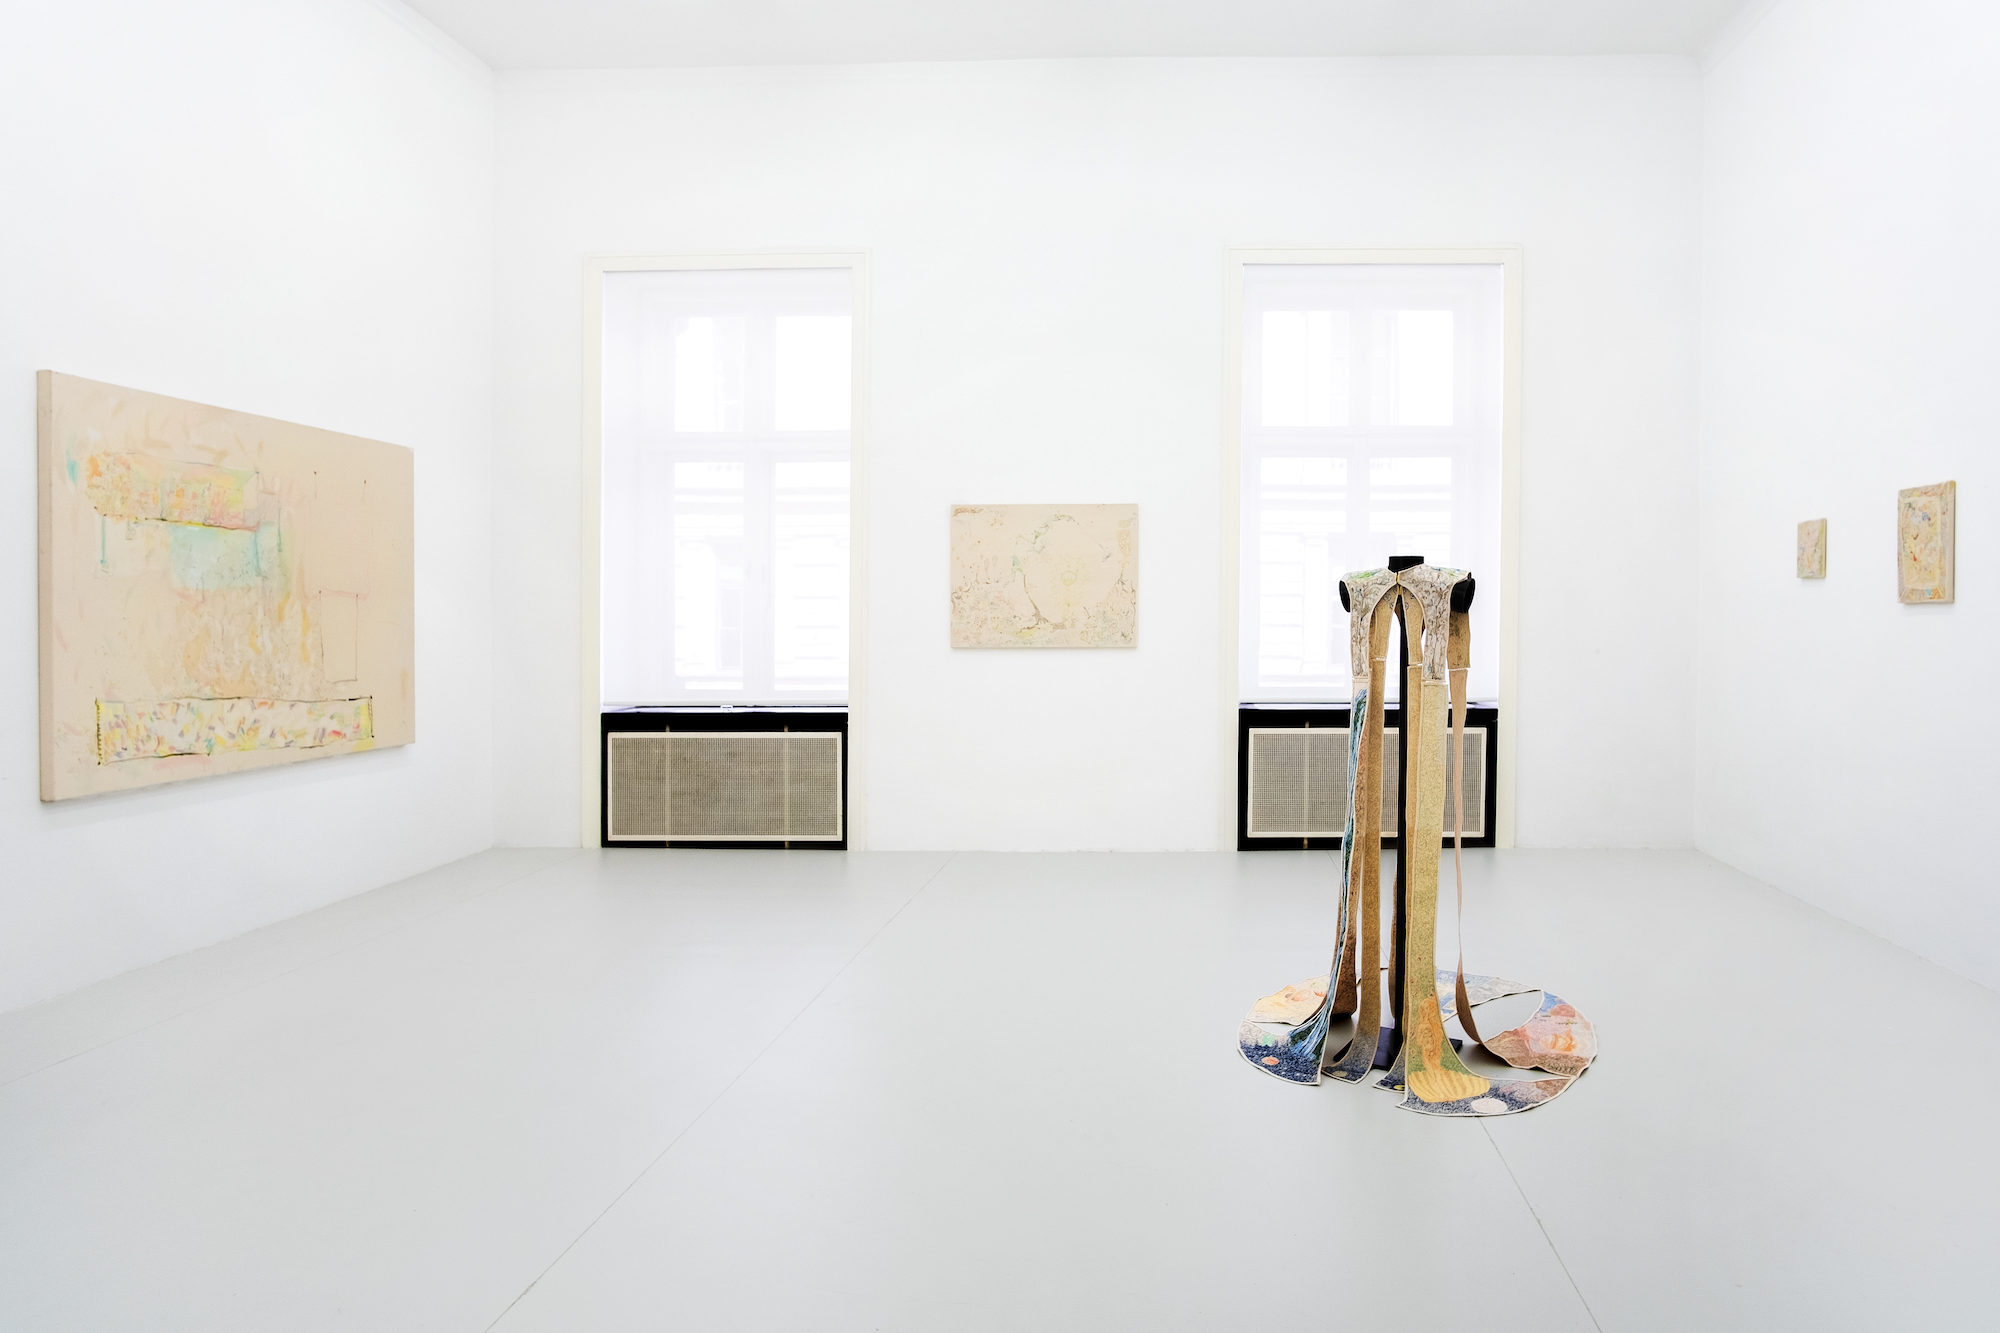 Installation image for Flora Hauser: OUSIA, at MEYER*KAINER